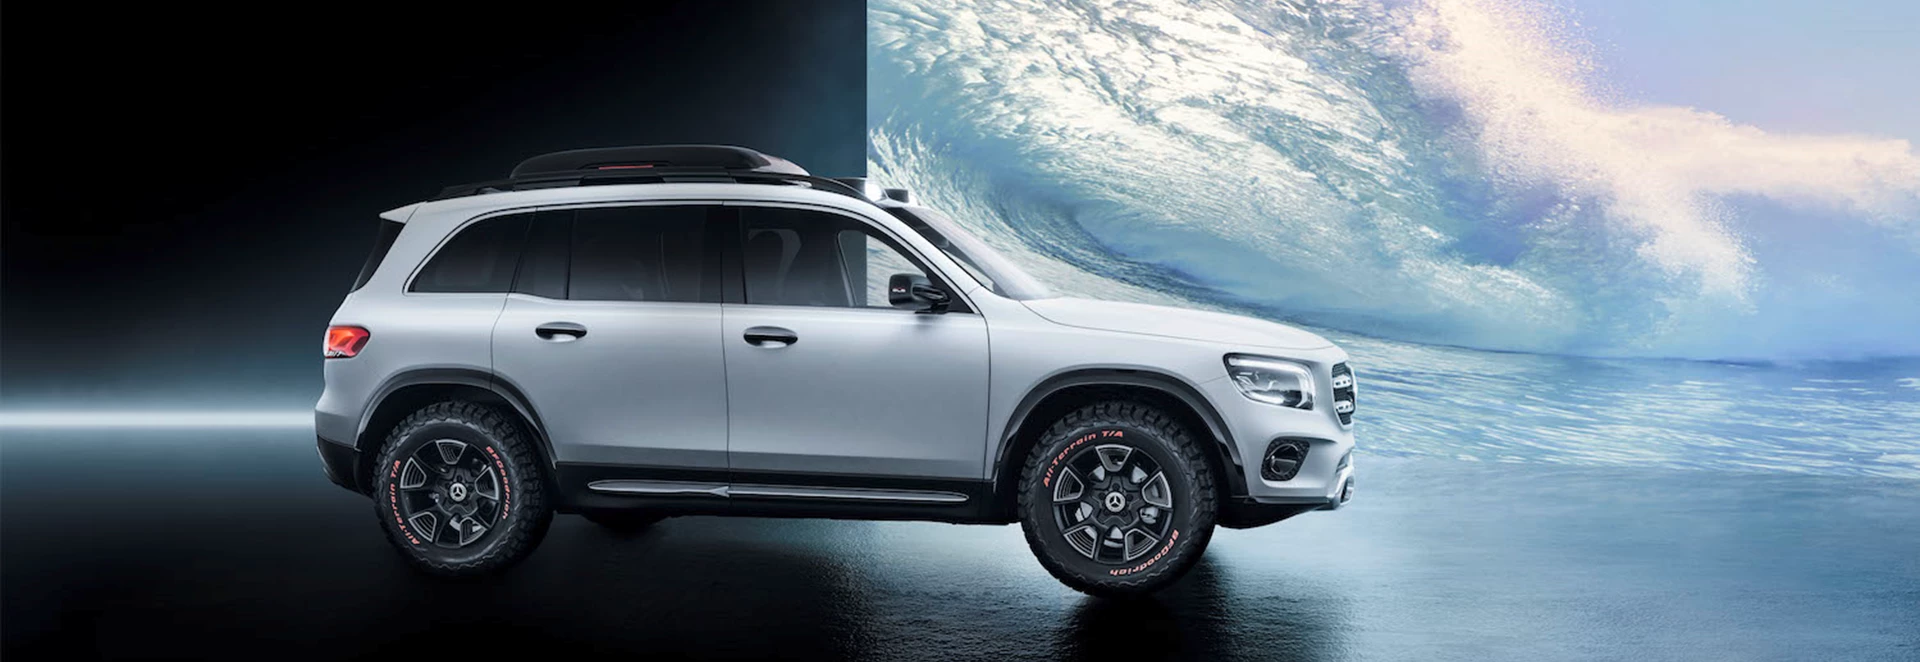 Mercedes-Benz GLB Concept unveiled at Shanghai Motor Show 